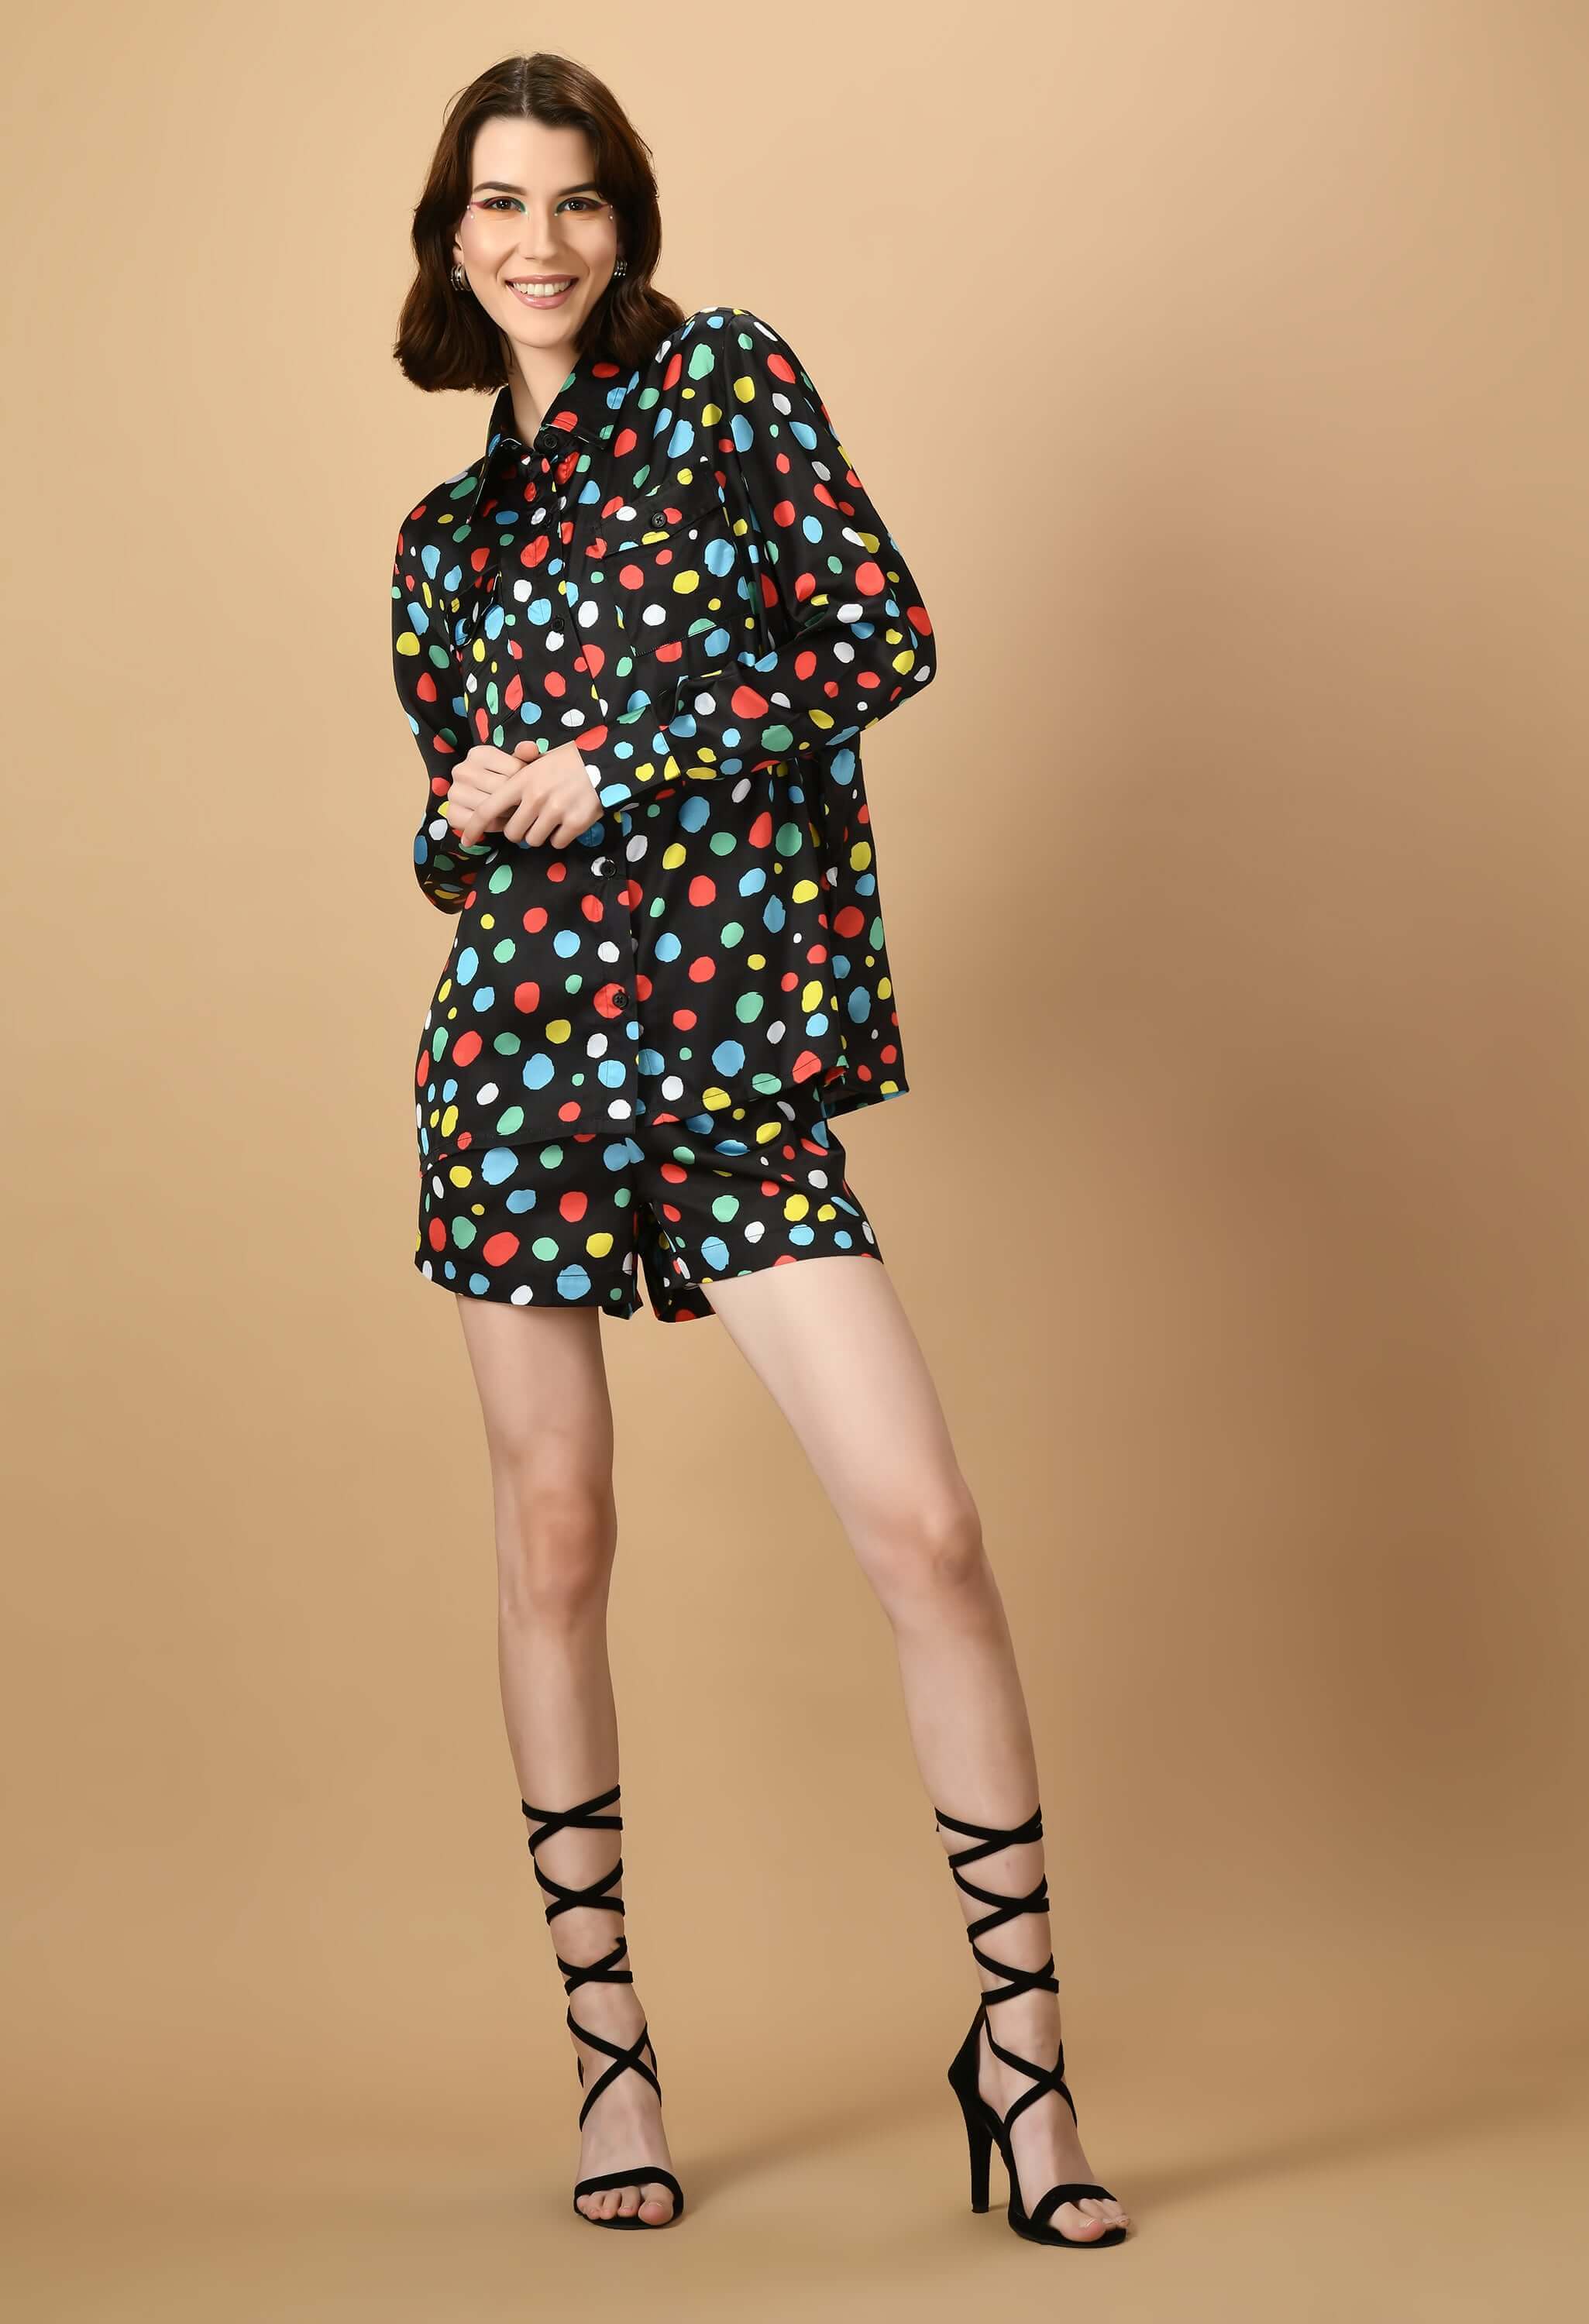 Multicolor polka dots women's co-ord set by offmint